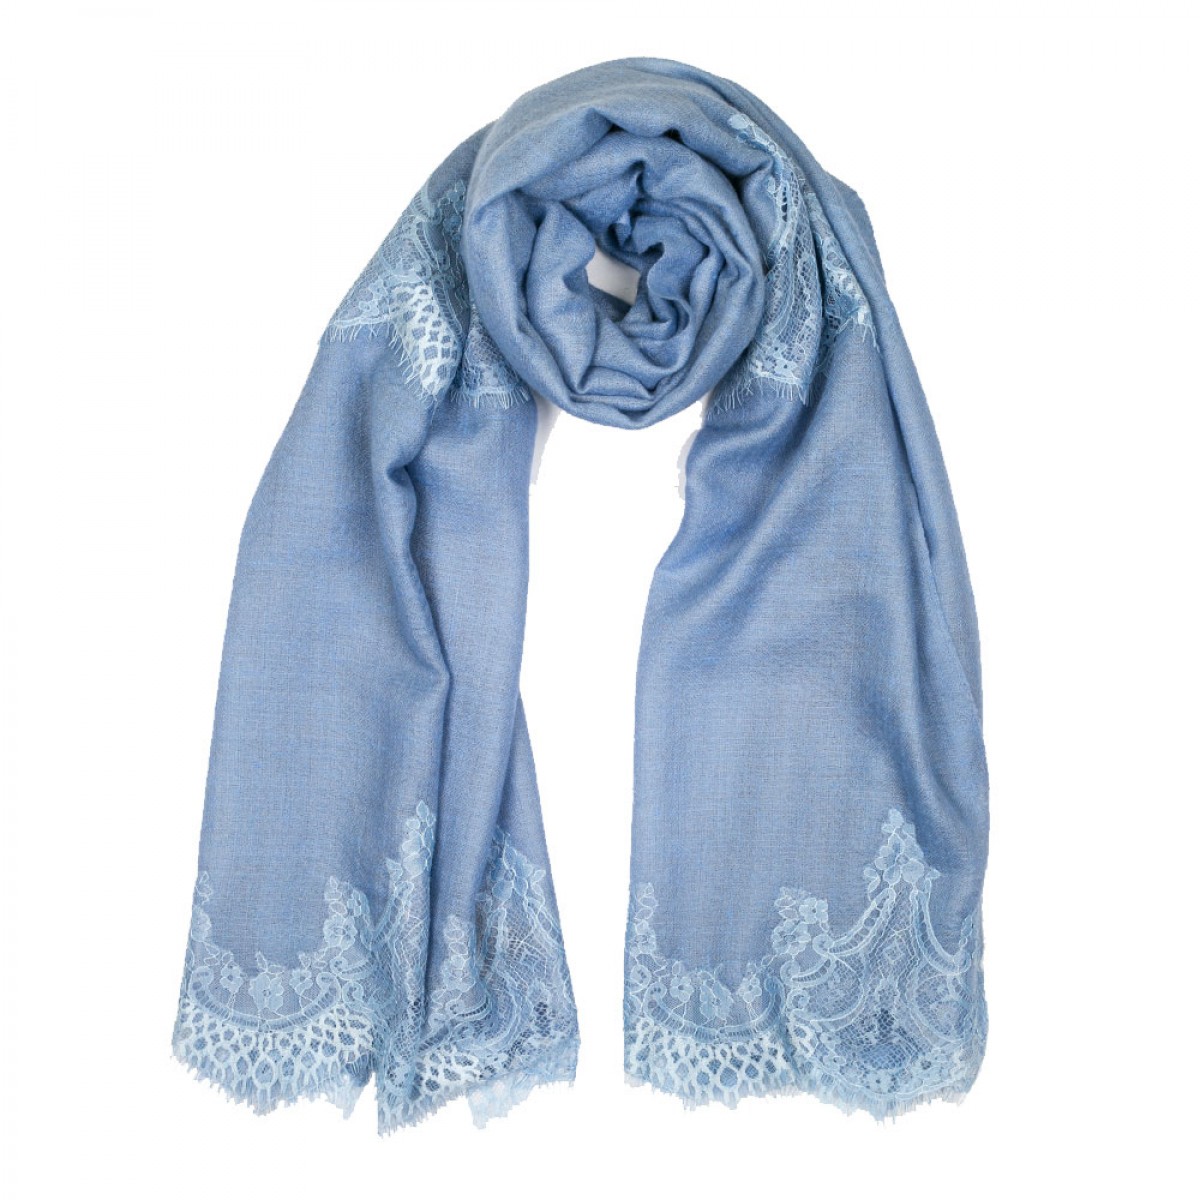 Lace Pashmina Scarf - Air Force Blue